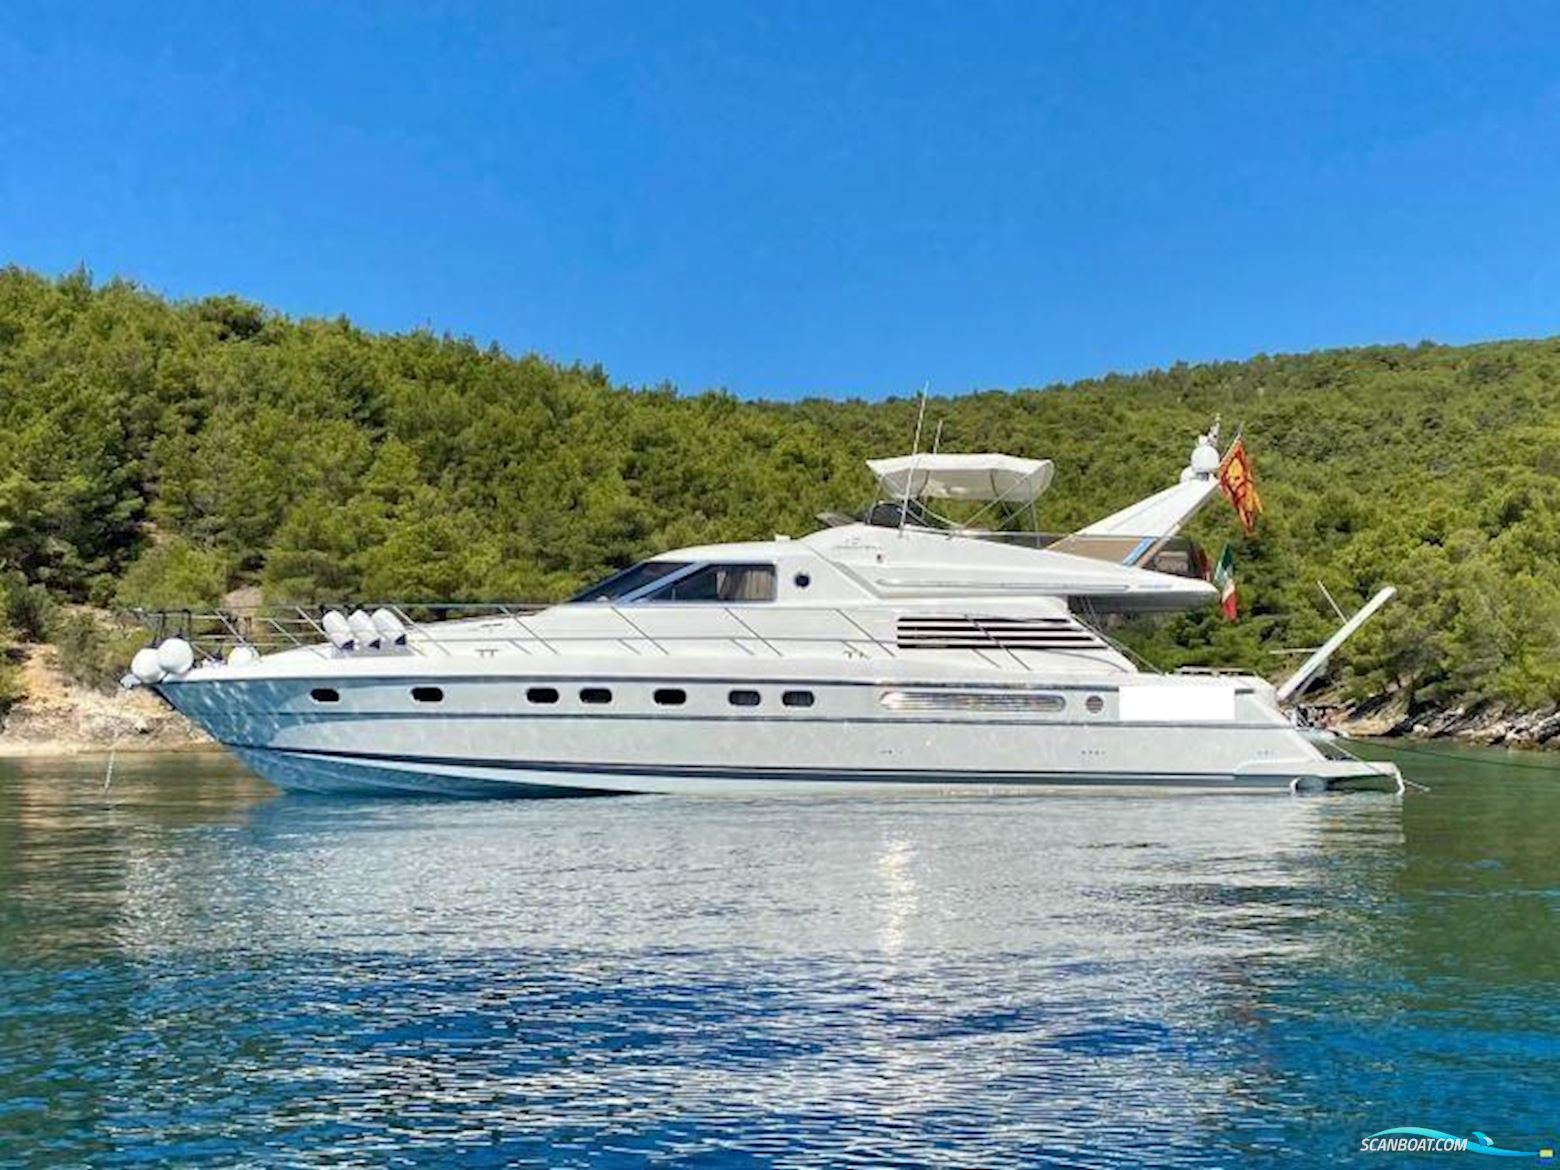 Fairline Squadron 62 Motor boat 1993, with Man engine, Italy